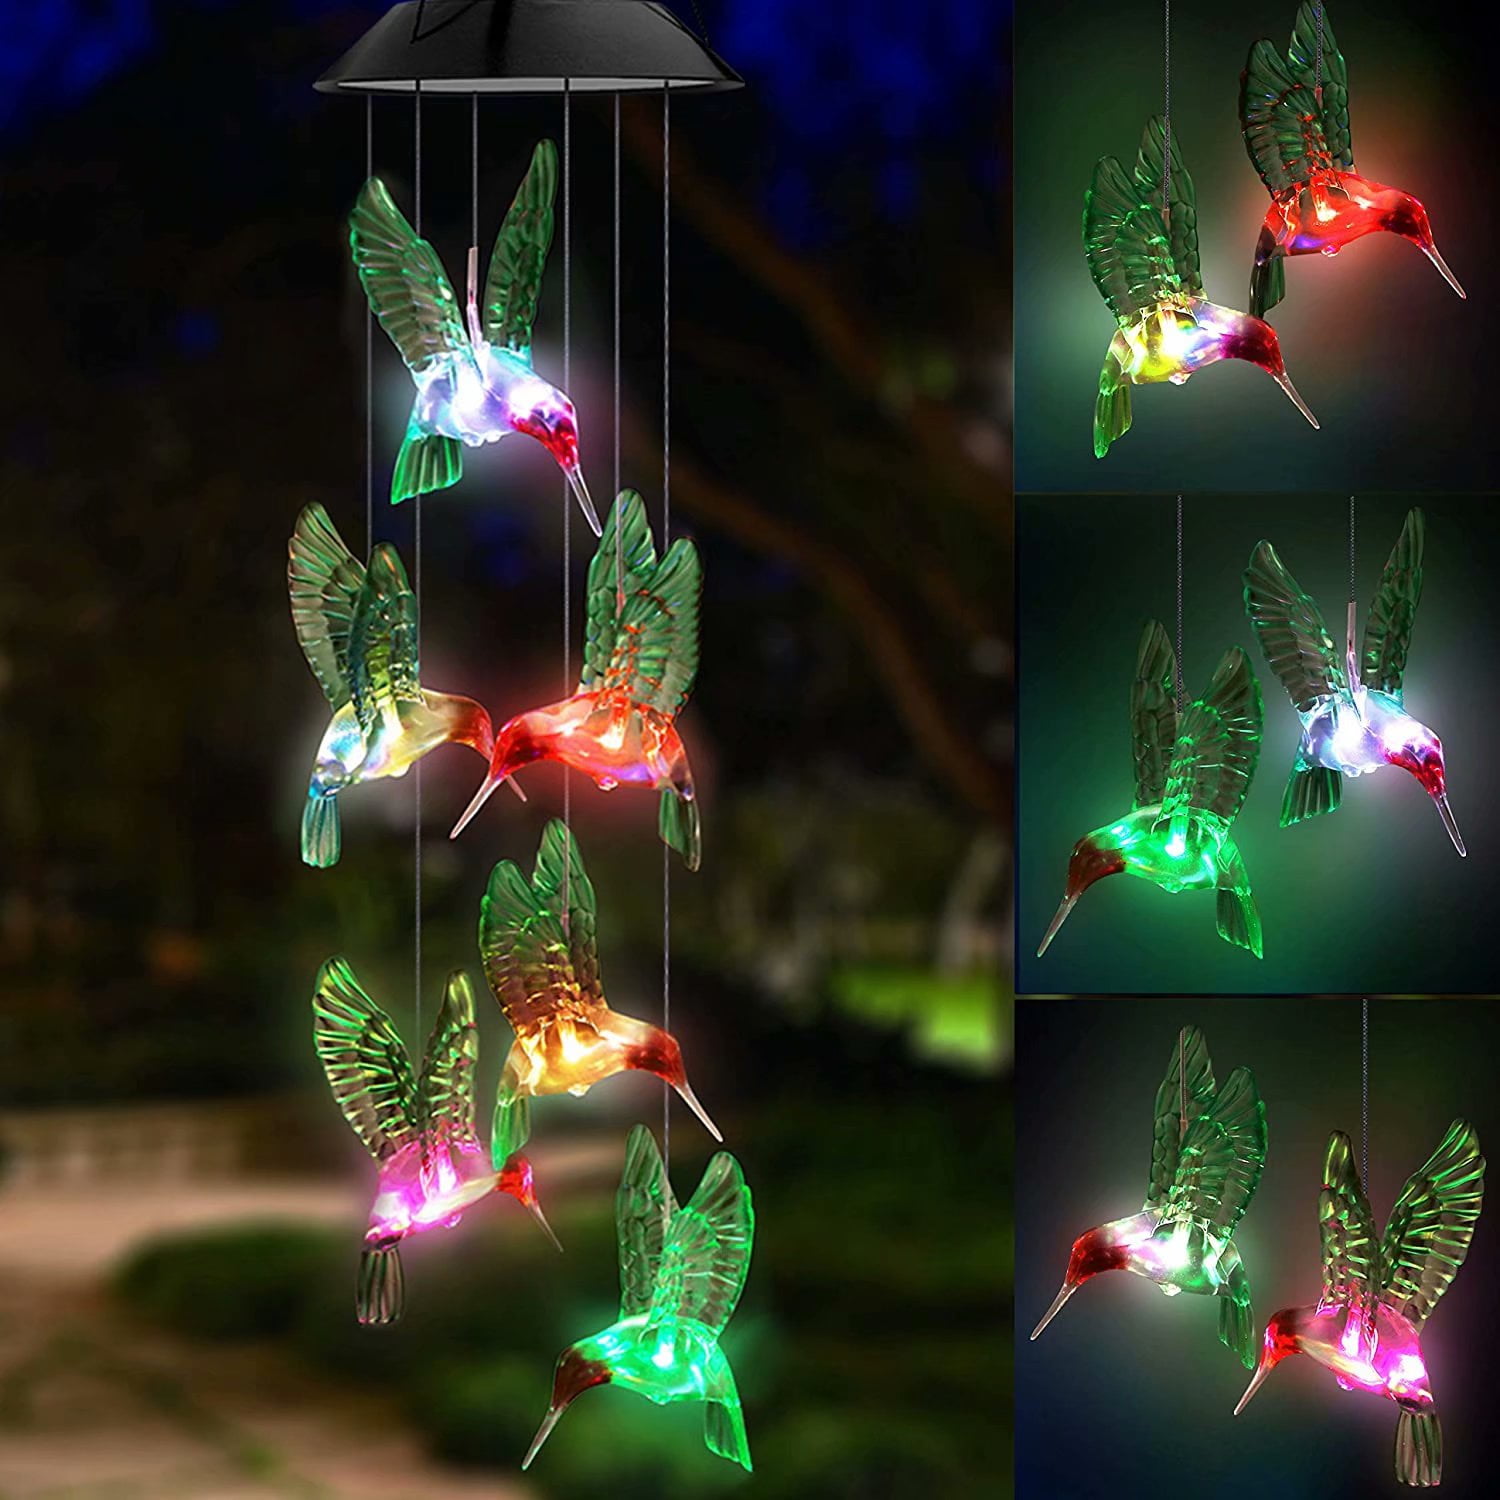 Wind Chime Solar Light Swonuk Outdoor Color-Changing LED Wind Chime Decorative Windbell Light for Garden Patio Deck Yard Type 1